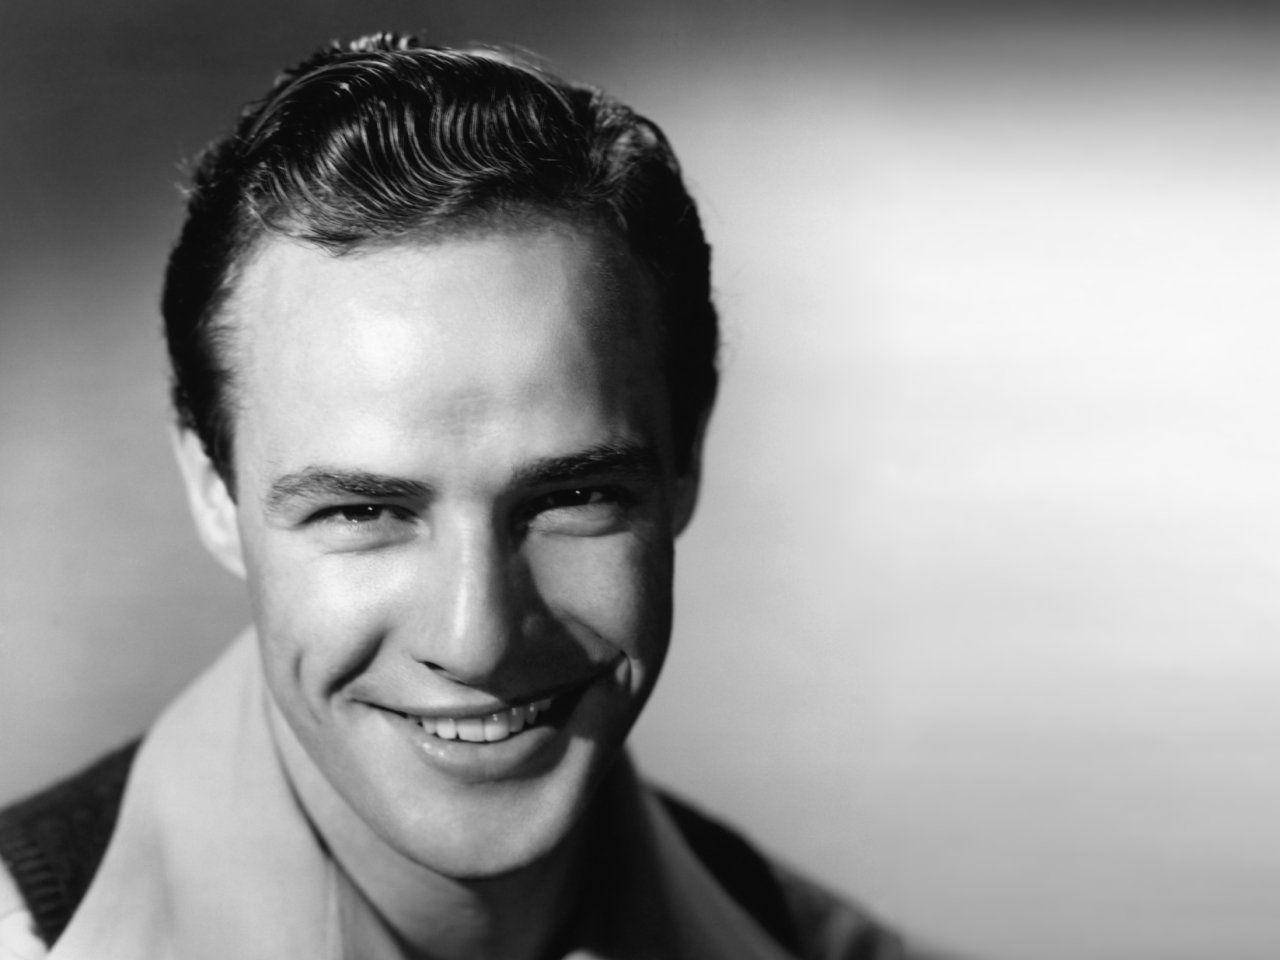 Marlon Brando Charming Smile With Dimples Wallpaper